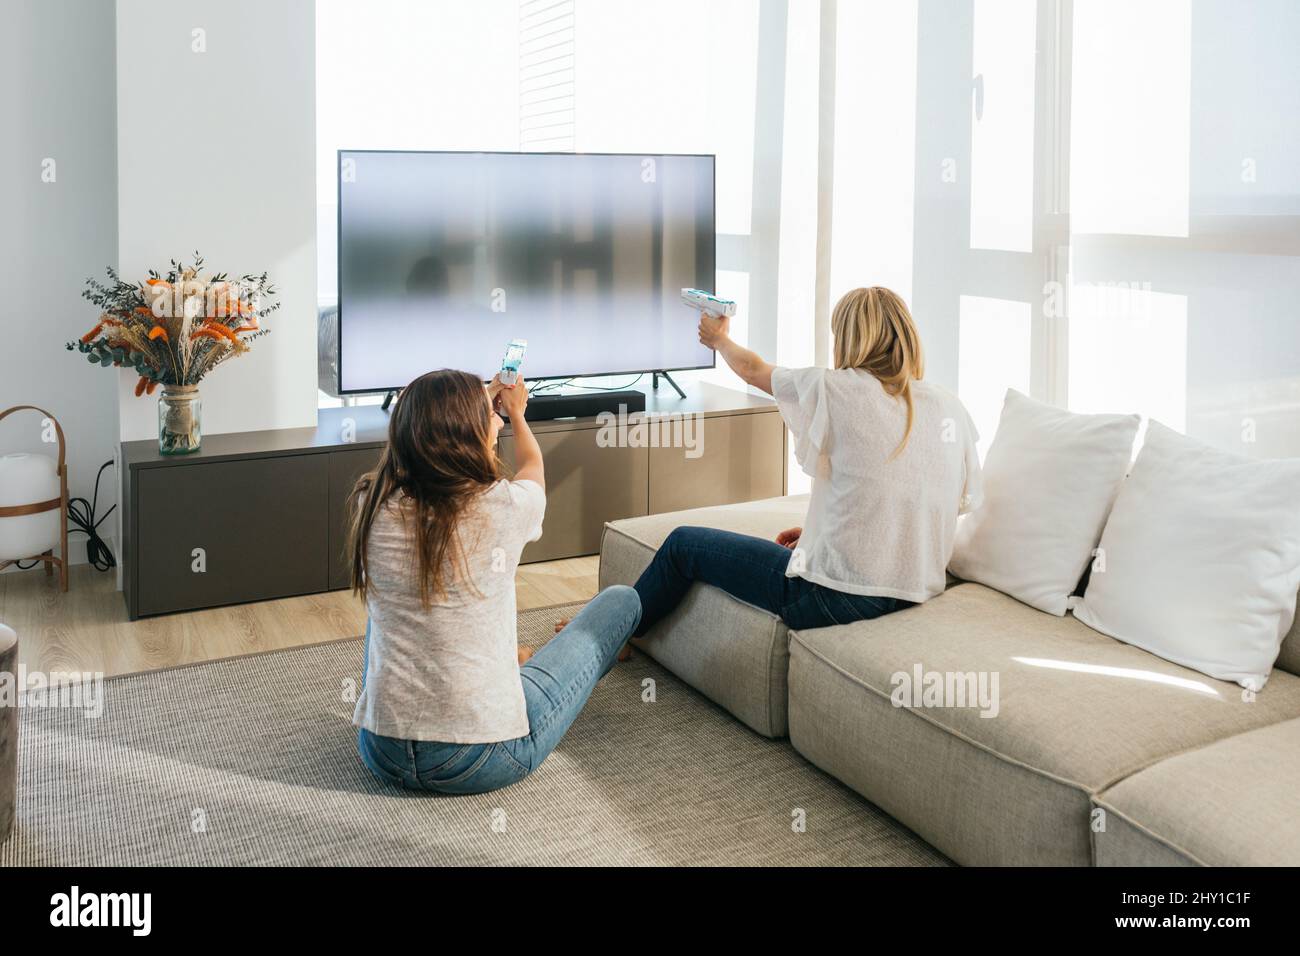 Back view of unrecognizable female friends with light pistols playing videogame on modern TV in light living room at home Stock Photo